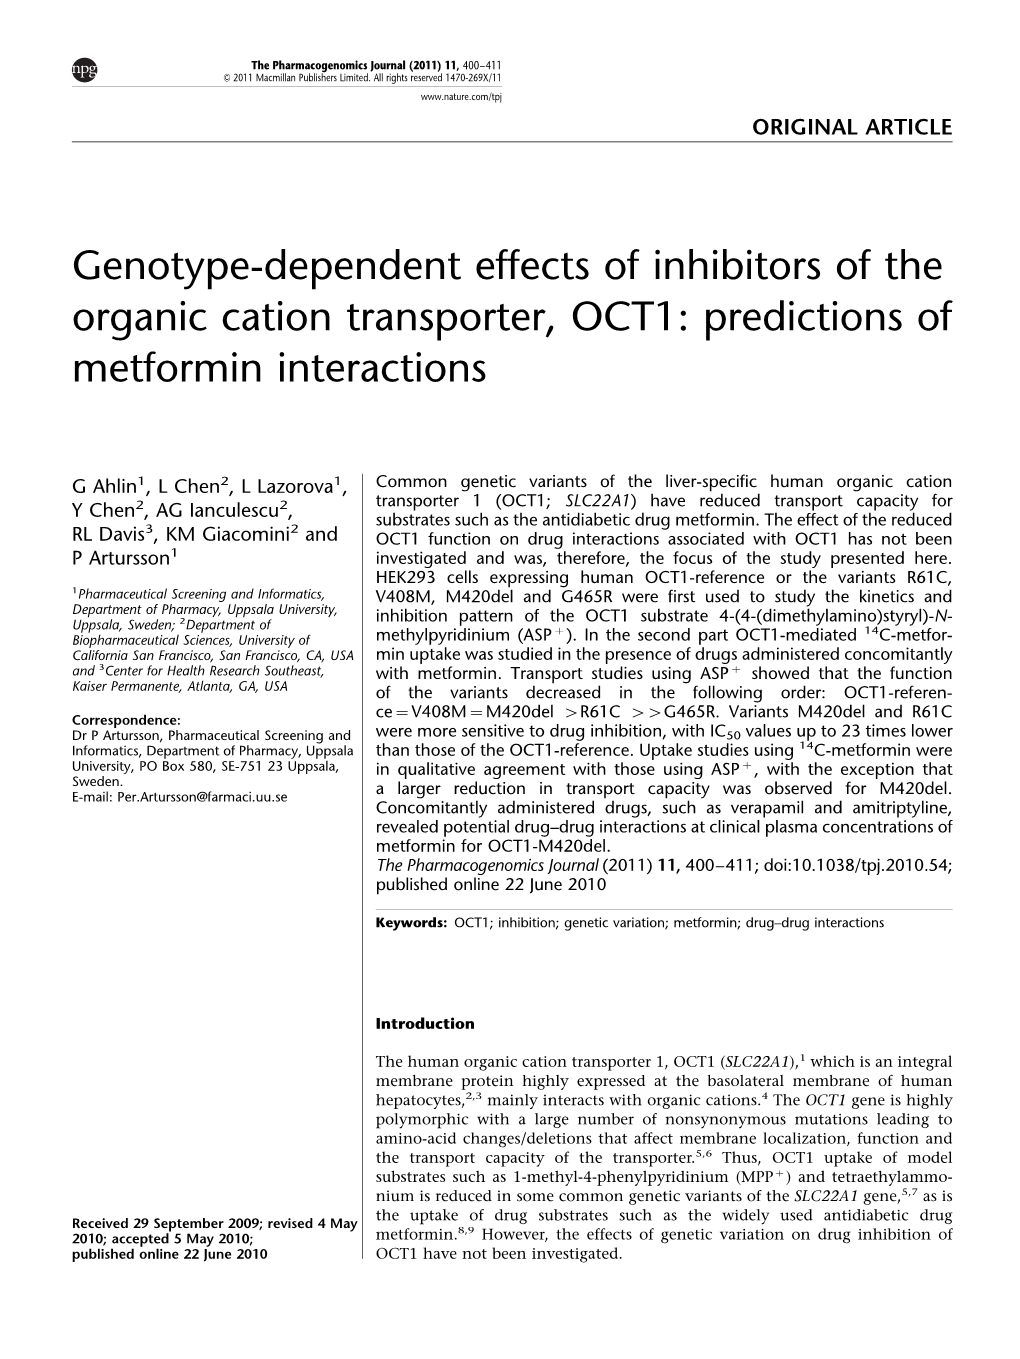 Genotype-Dependent Effects of Inhibitors of the Organic Cation Transporter, OCT1: Predictions of Metformin Interactions